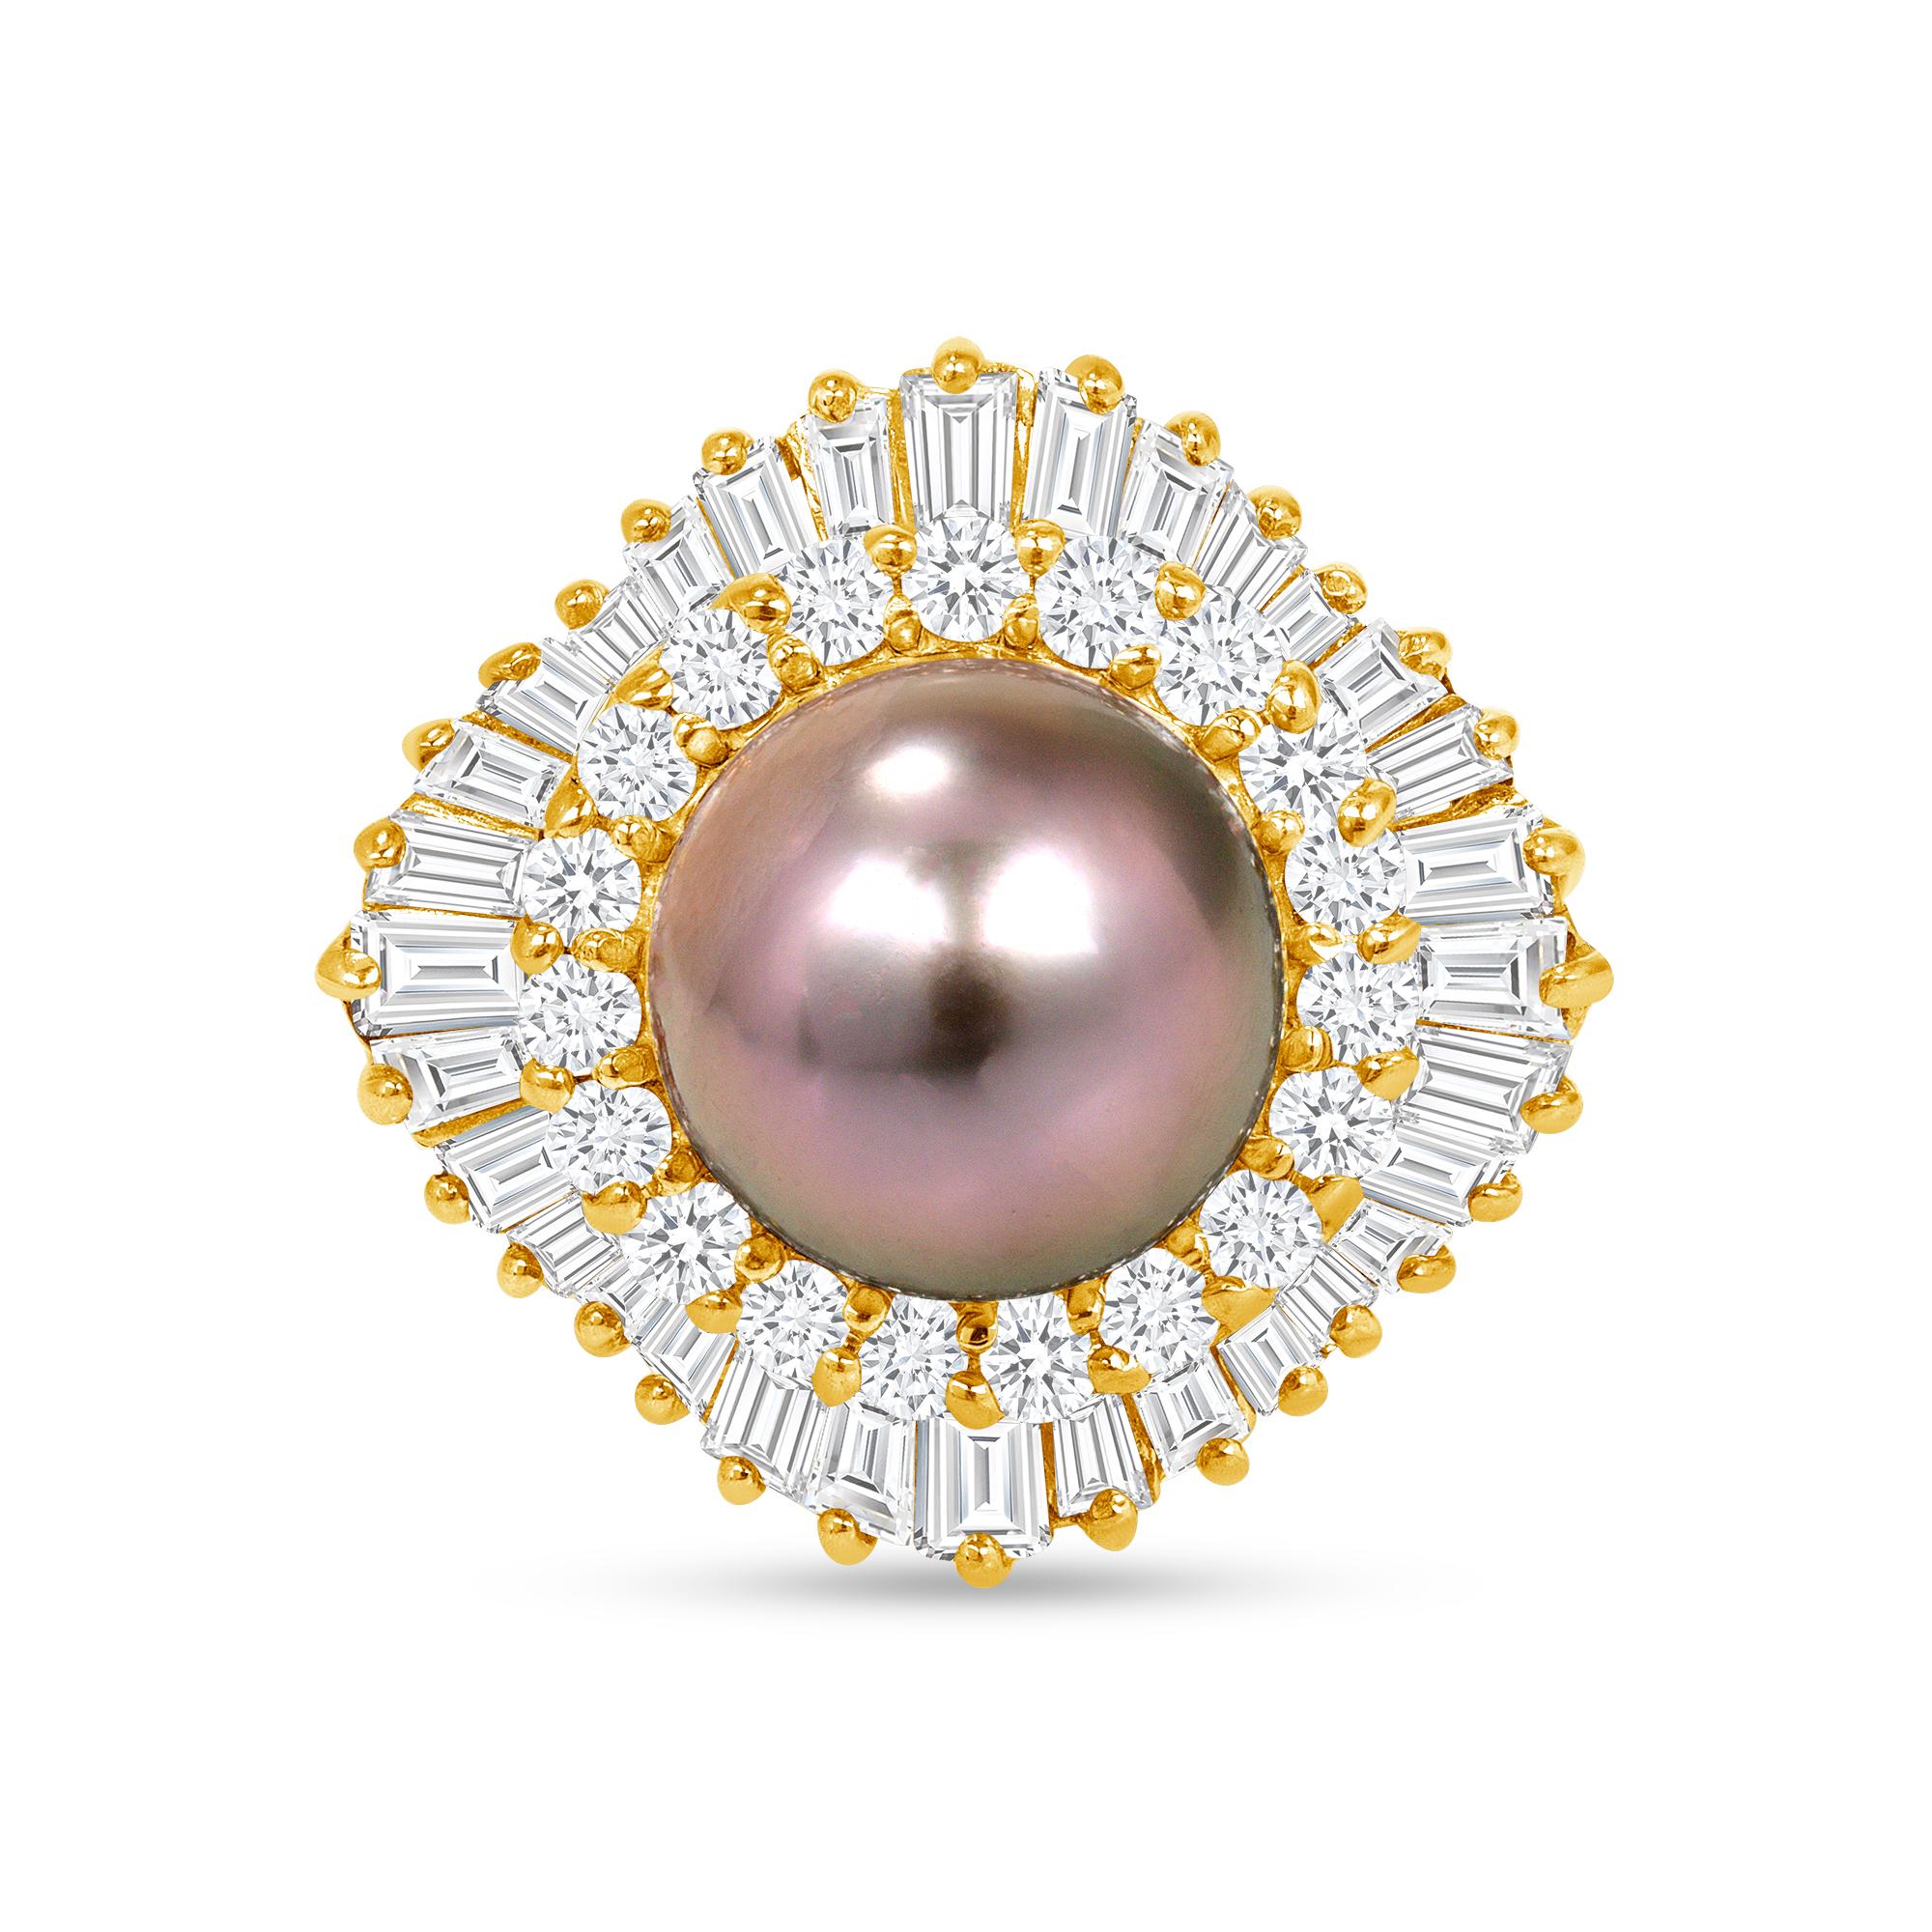 Ballerina Ring
2.5 Carat Genuine Diamonds 
Baguette & Round 
Center 9.2MM South Sea Pearl 
Total Gold Weight: 9.2grams